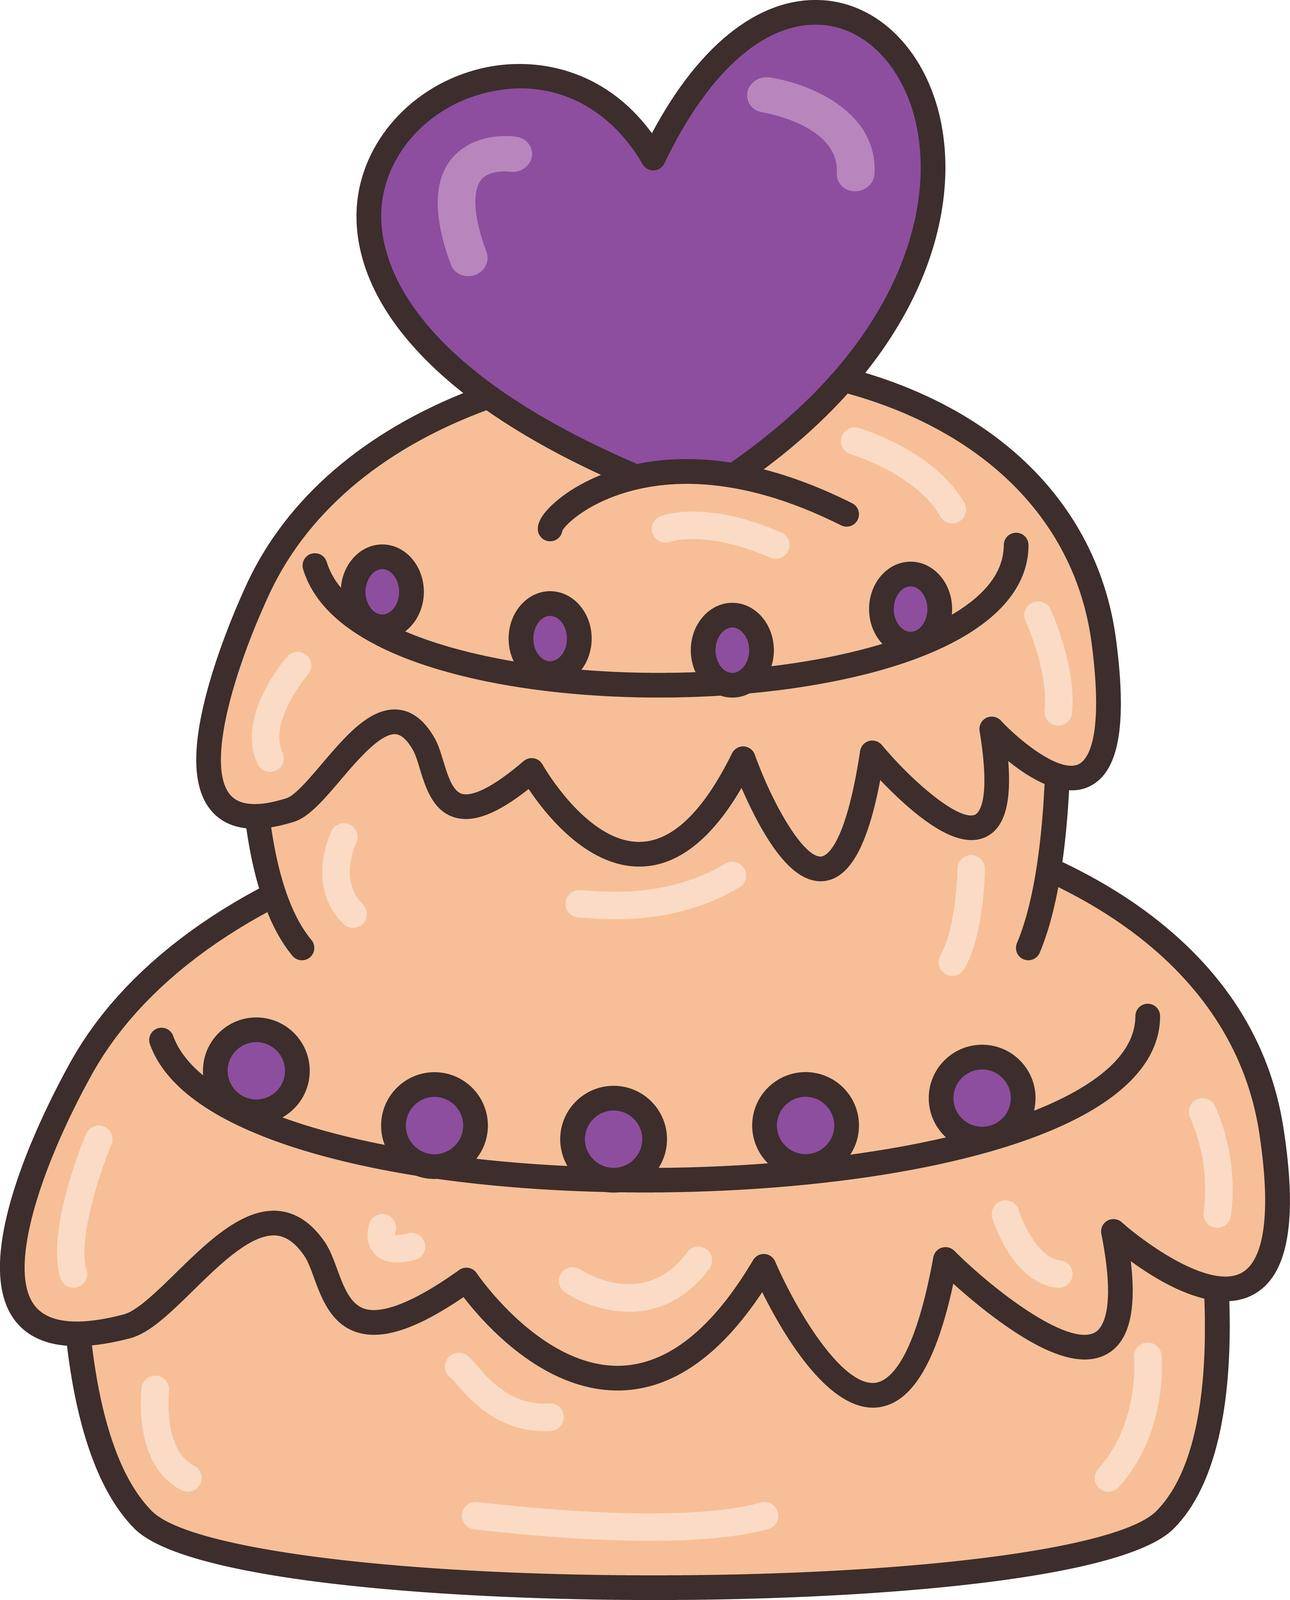 cake Vector illustration on a transparent background.Premium quality symmbols.Vector line flat icon for concept and graphic design.